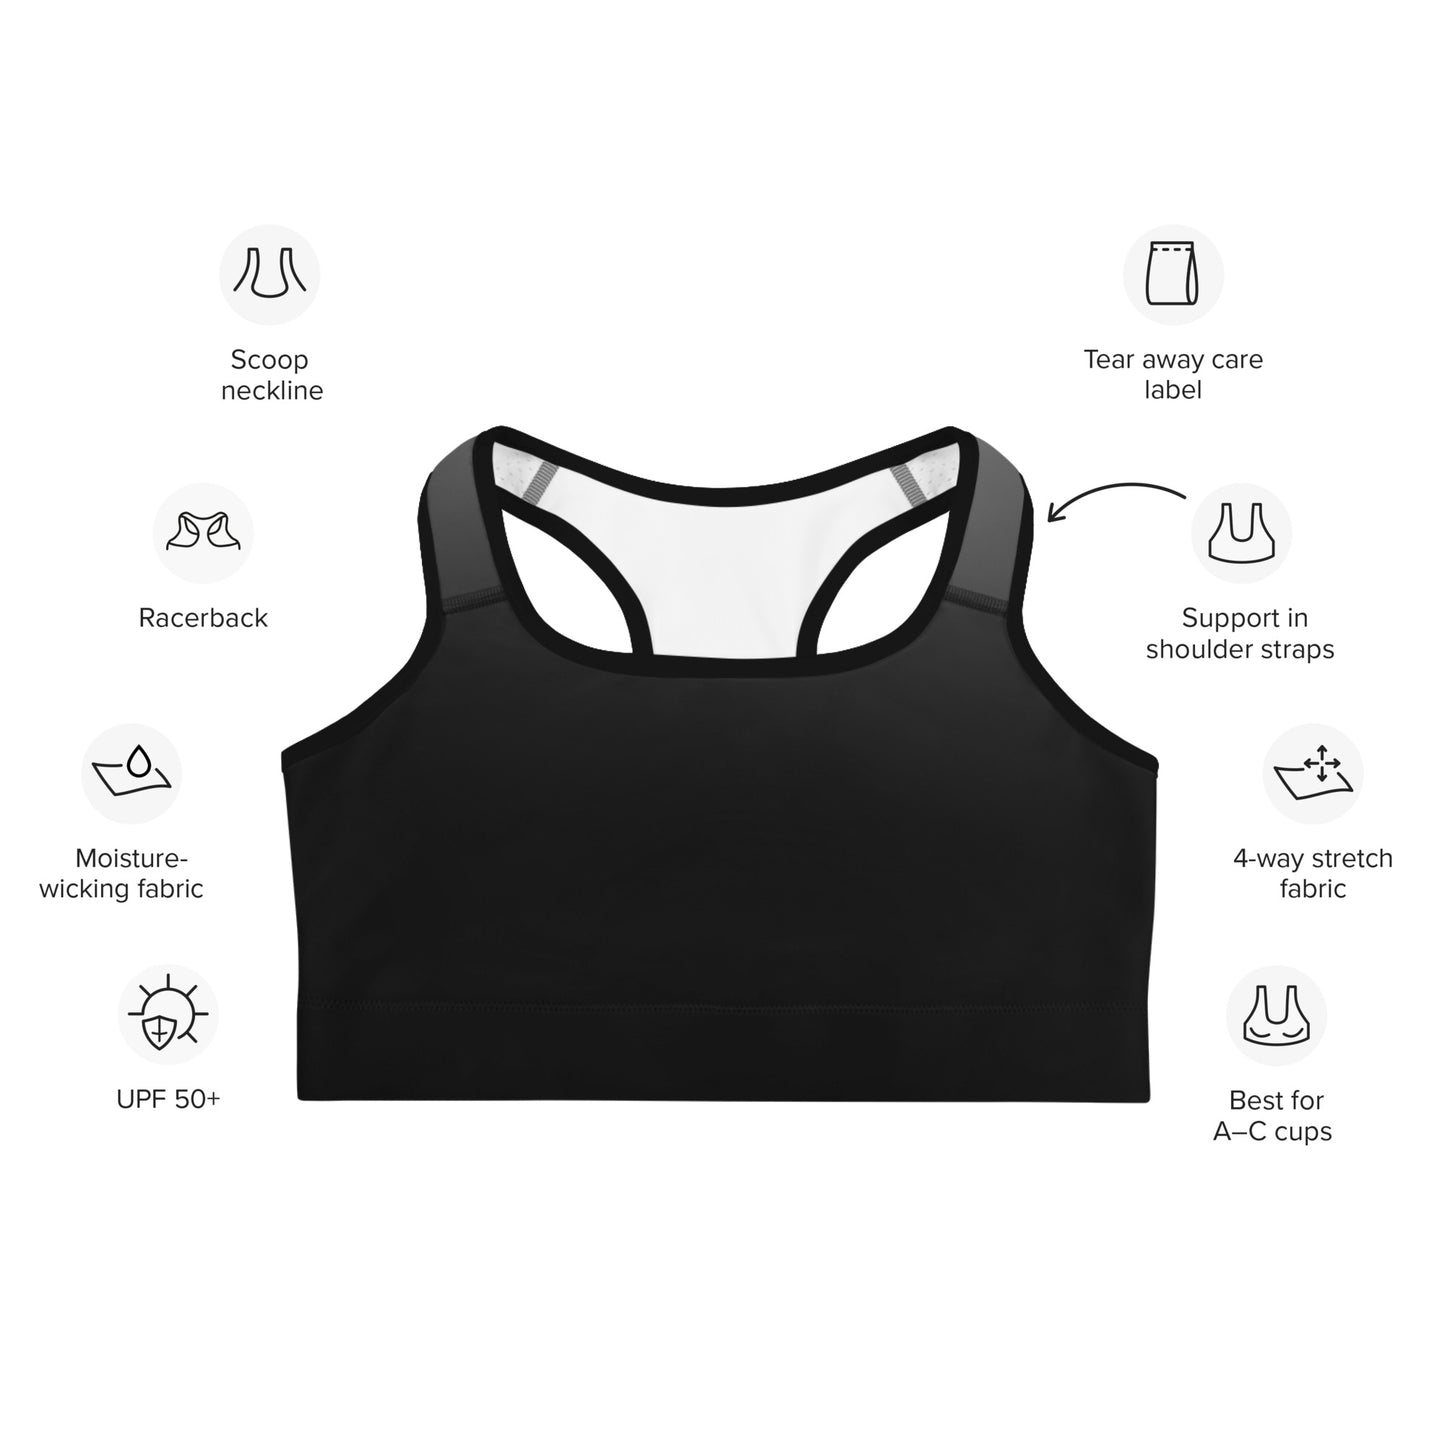 Introducing the Black Gradient BeSculpt Women Sports Bra—a sleek and versatile addition to your activewear collection!